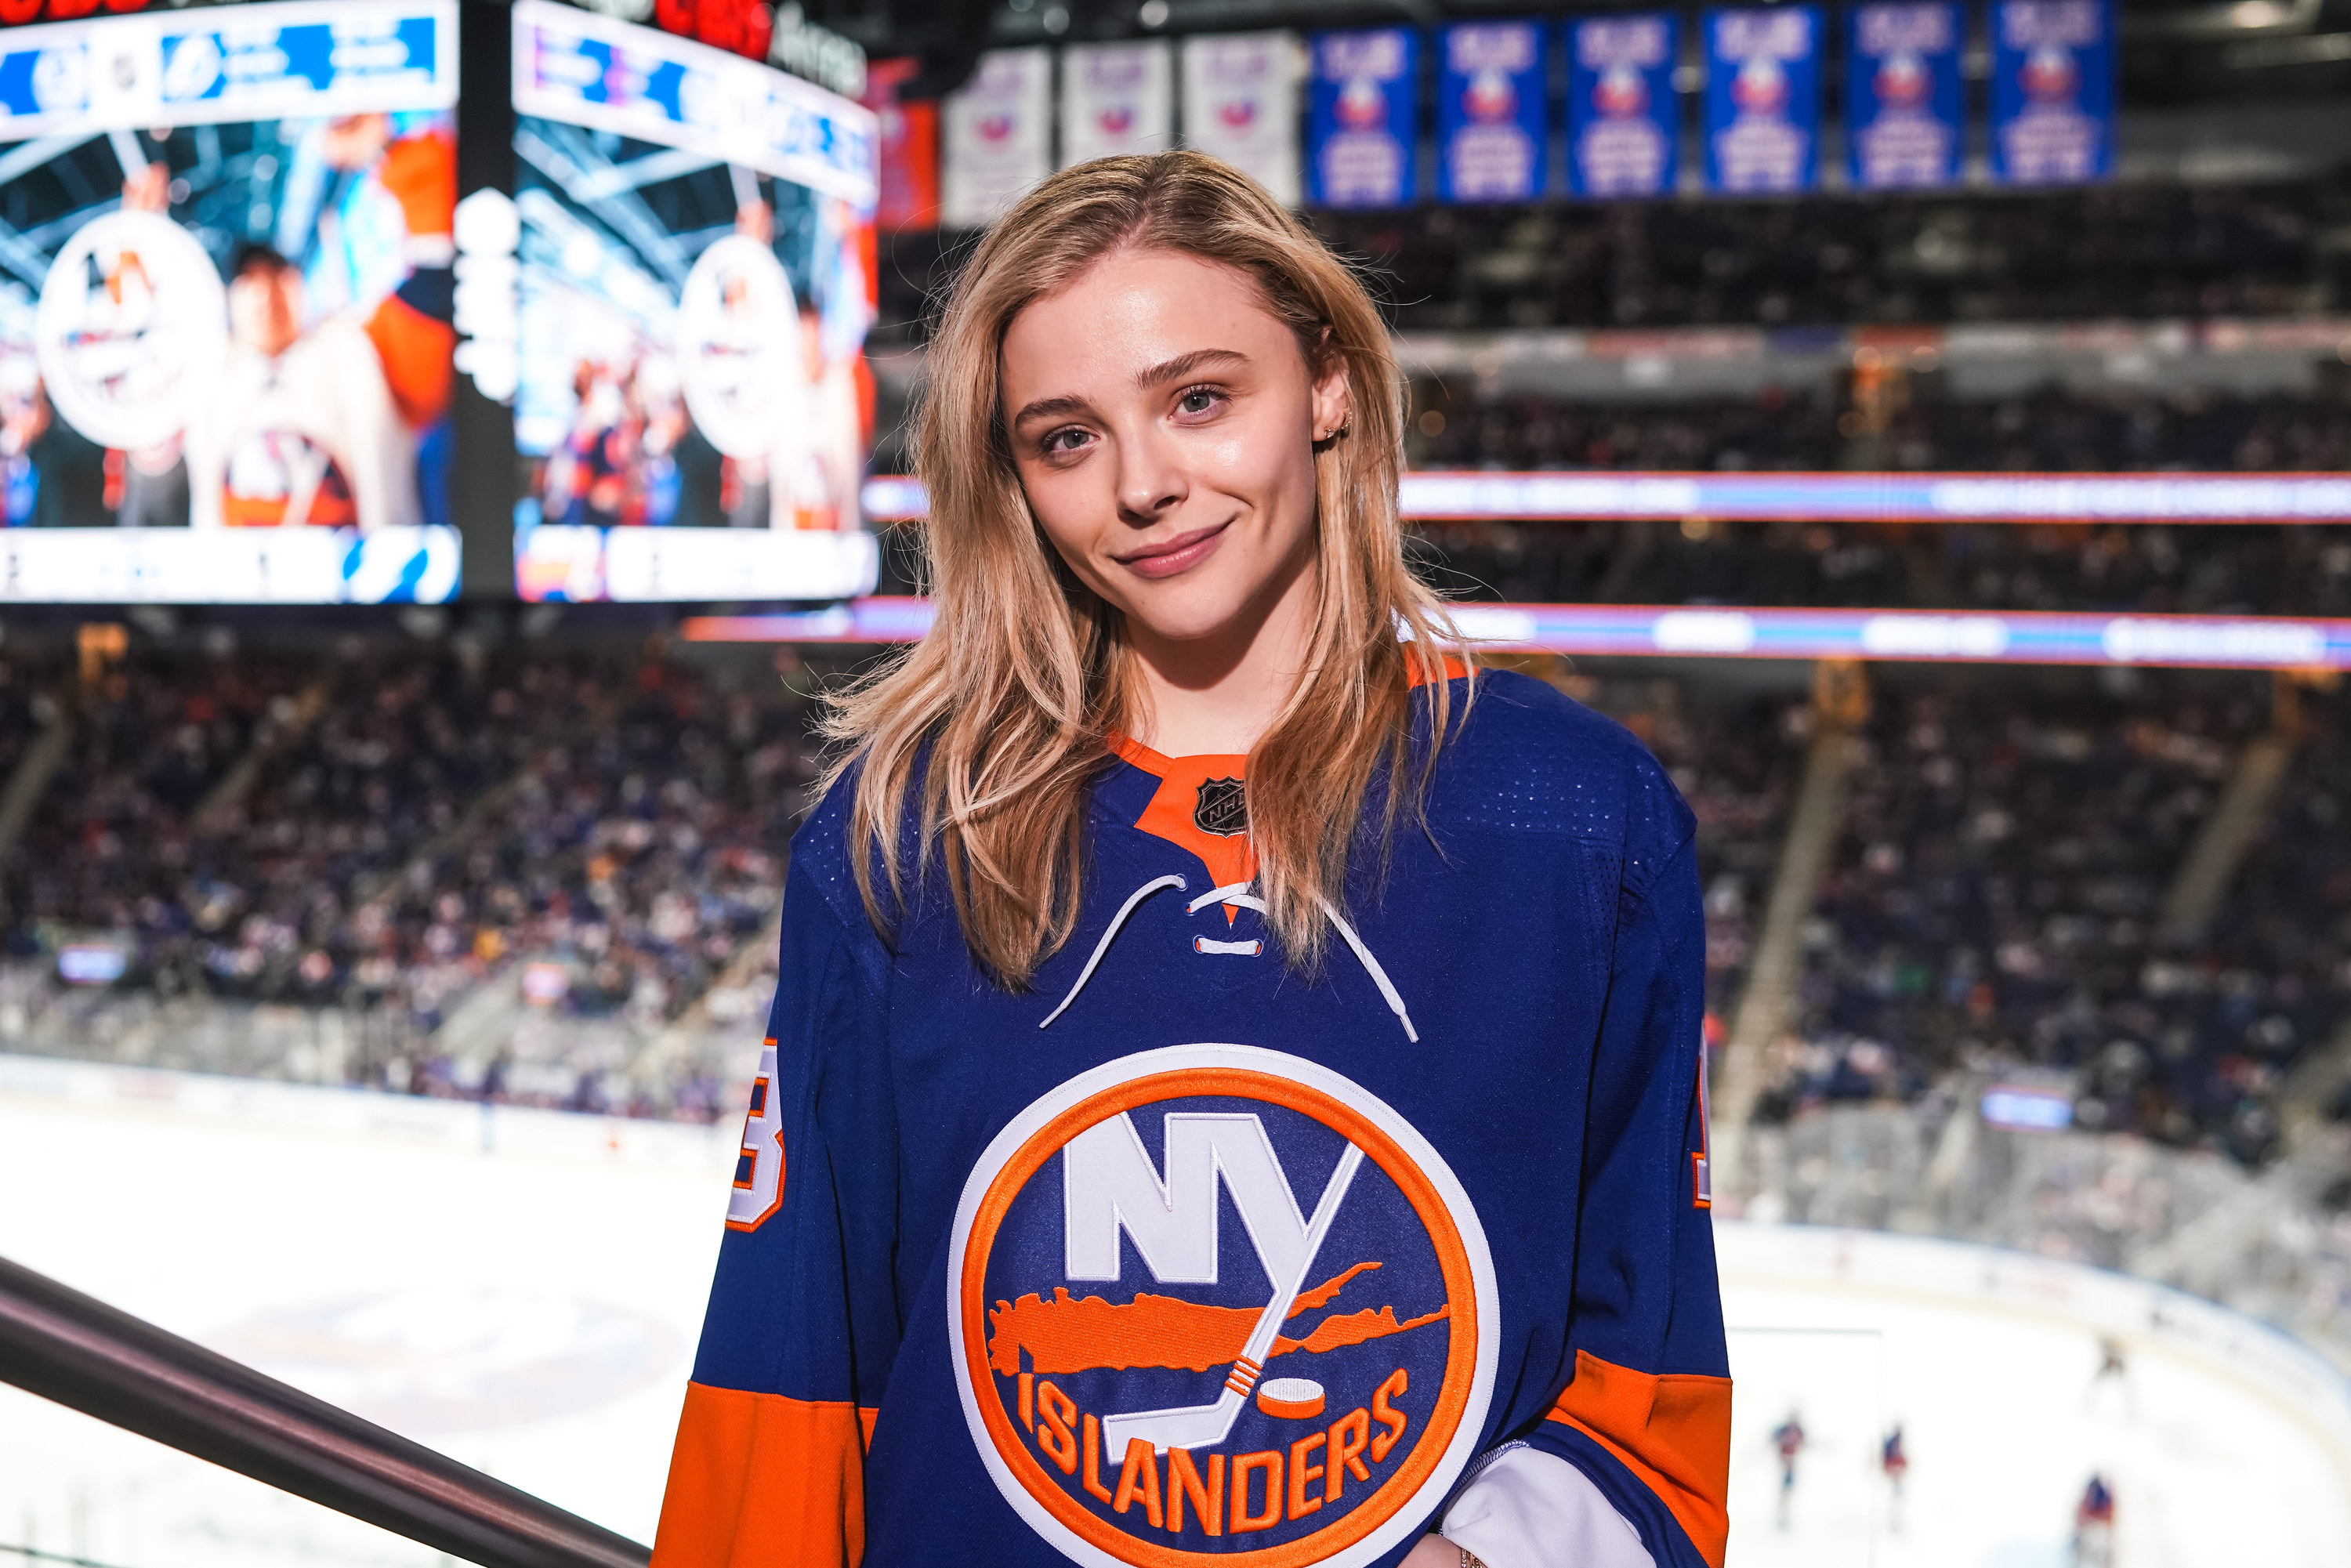 Actress Chloë Grace Moretz attends the game between the New York Islanders and the Tampa Bay Lightning